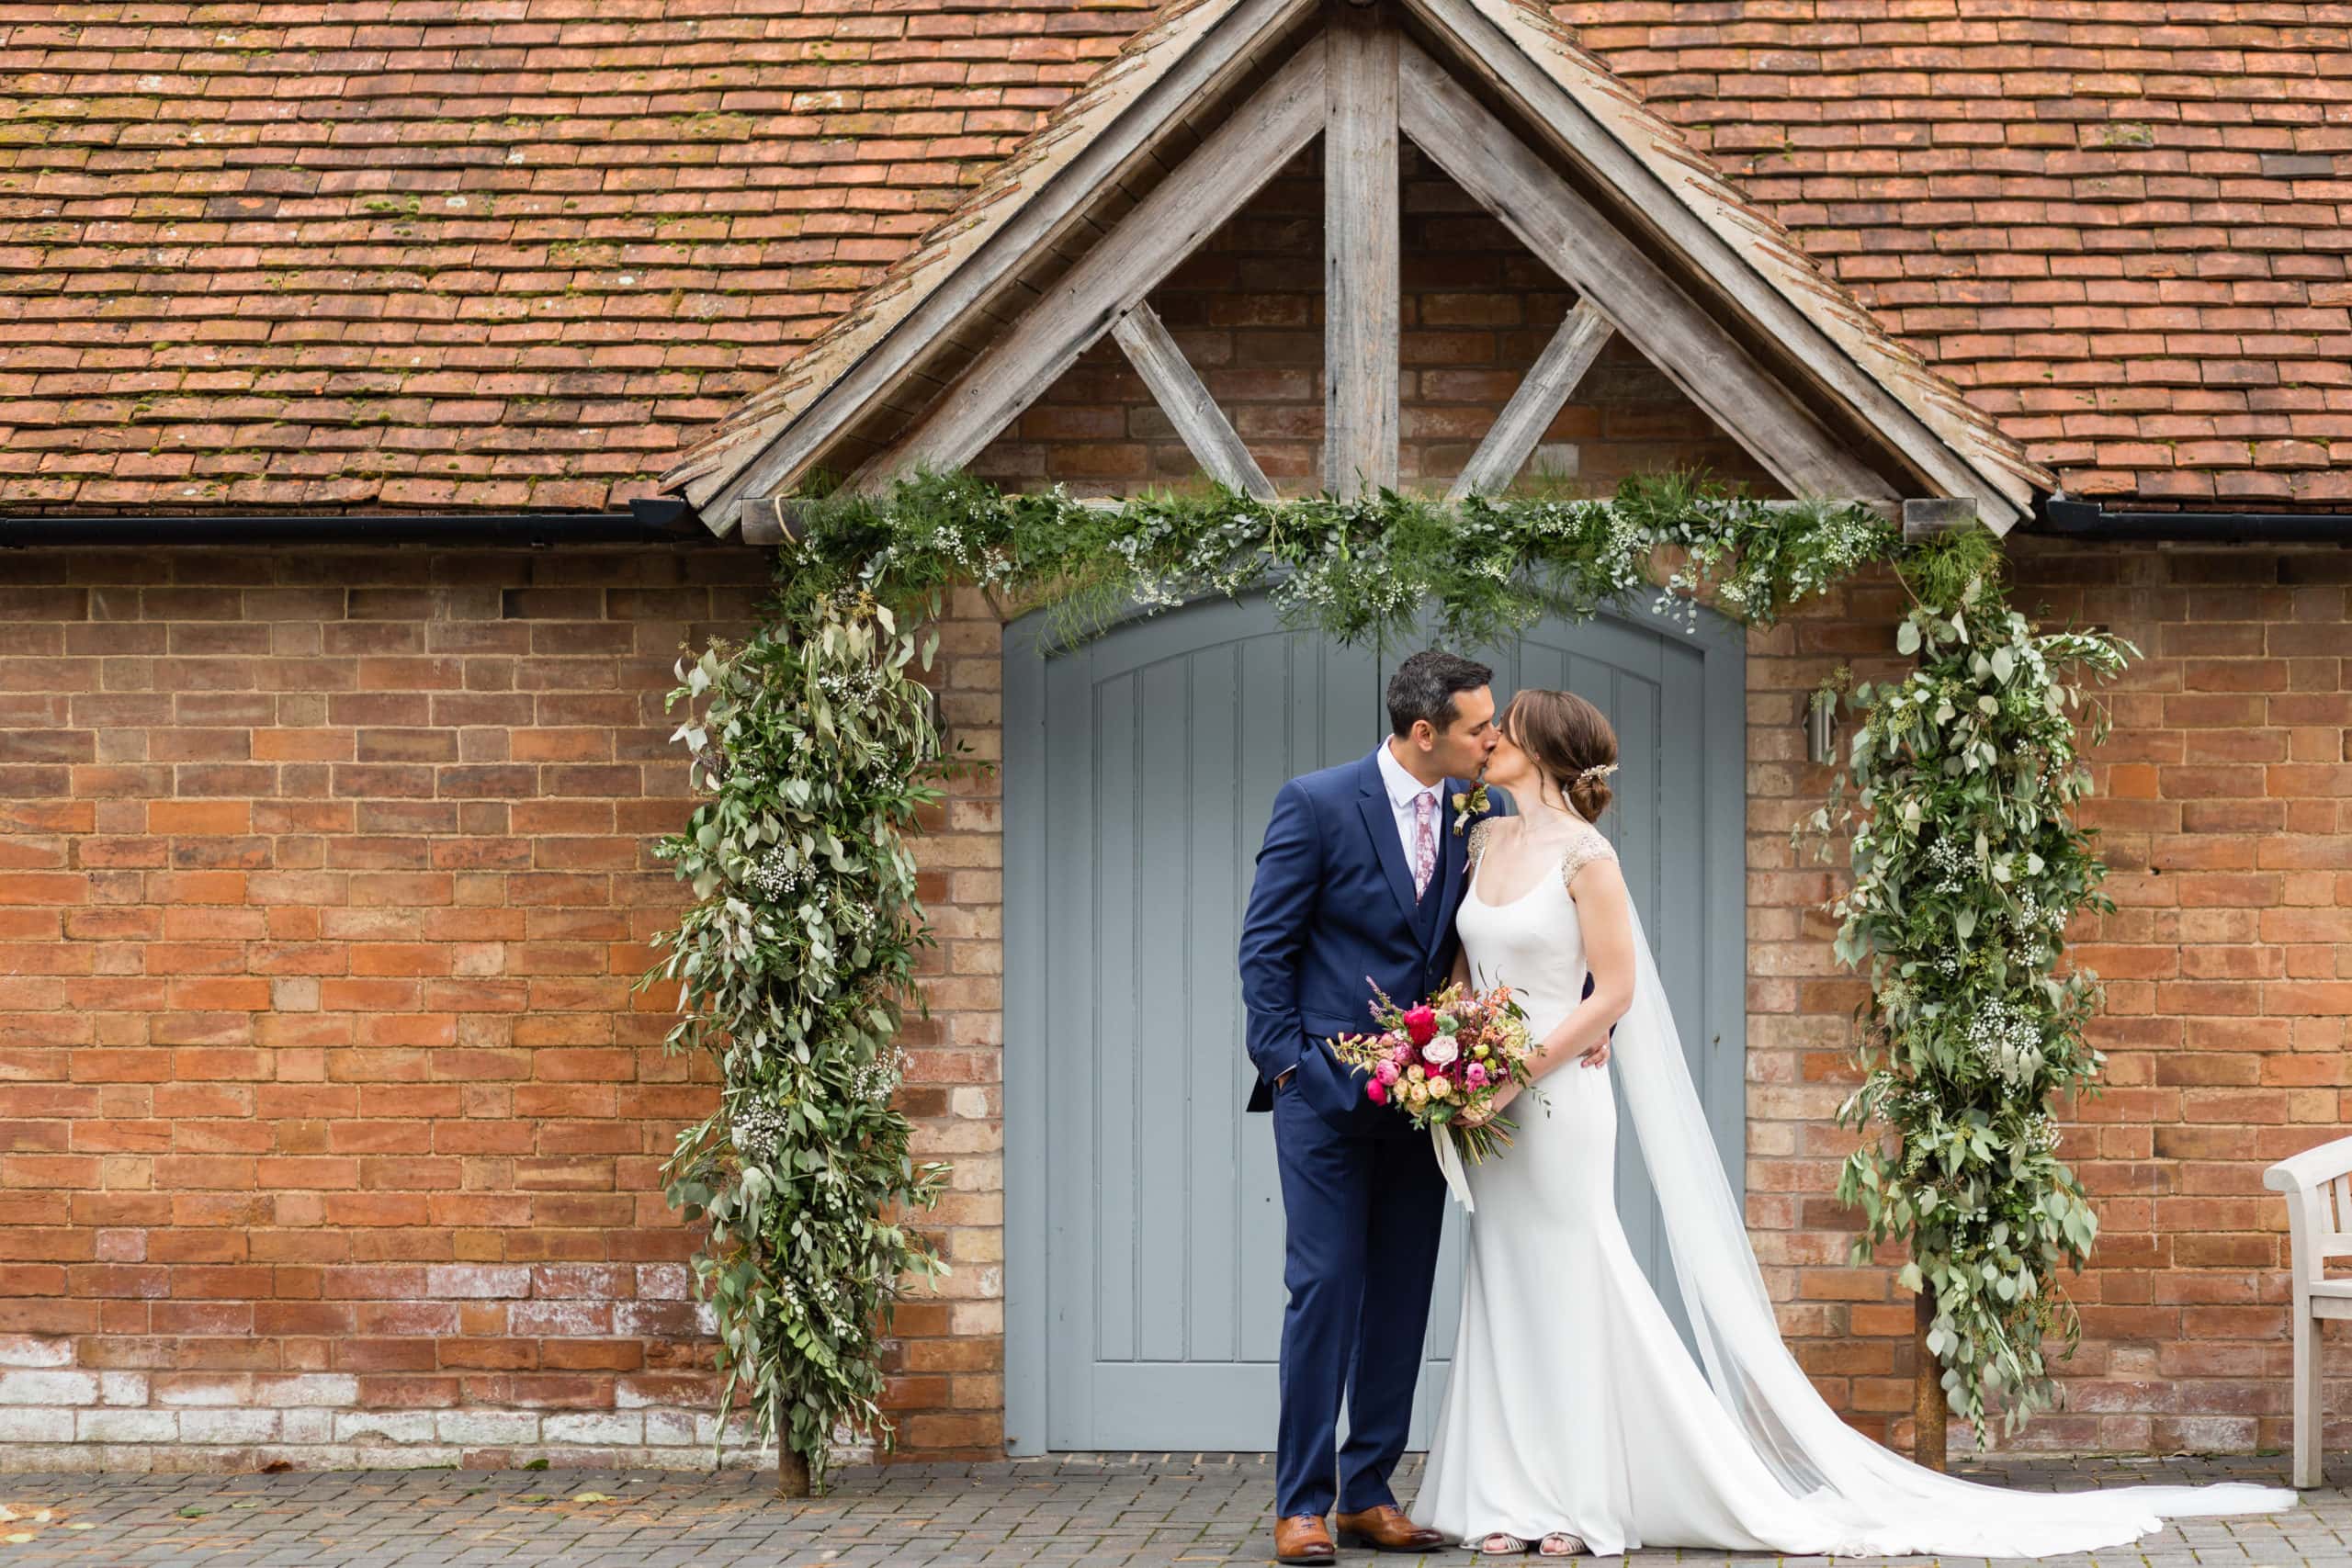 Bride and Groom kissing in under an archway of green foliage in front of grey door